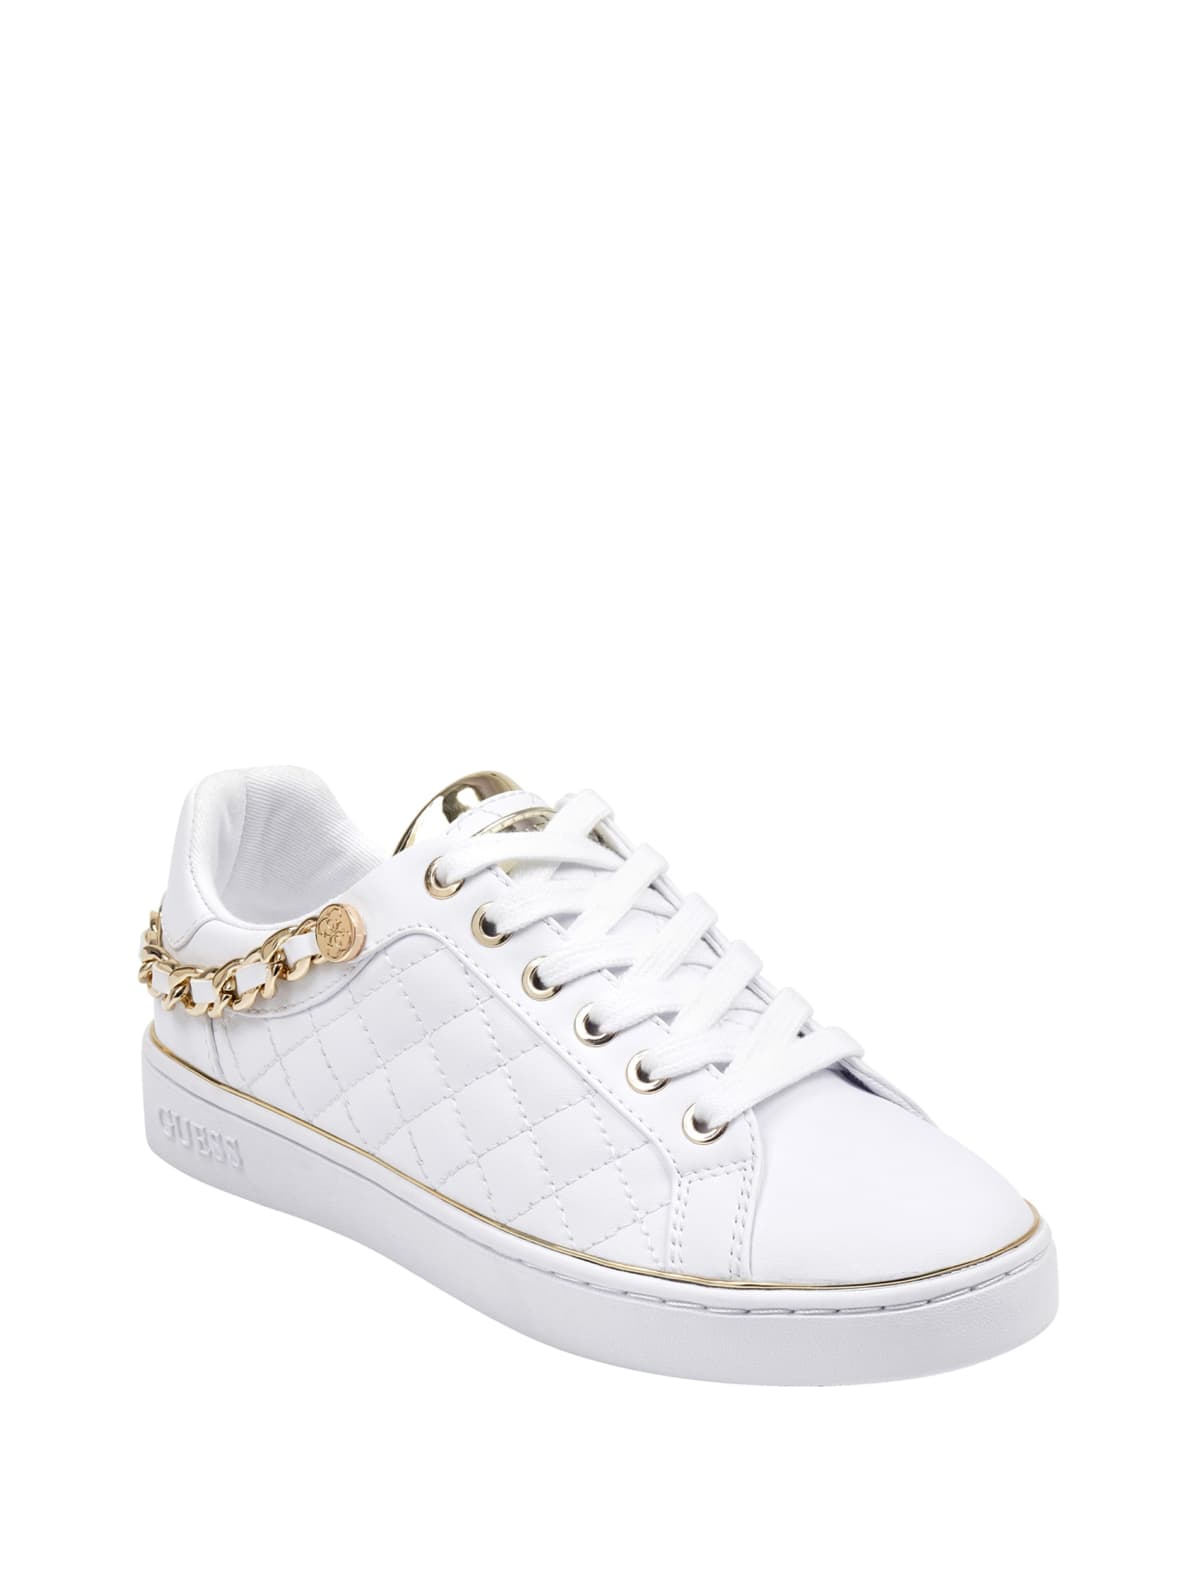 Brisco Quilted Low-Top Sneakers